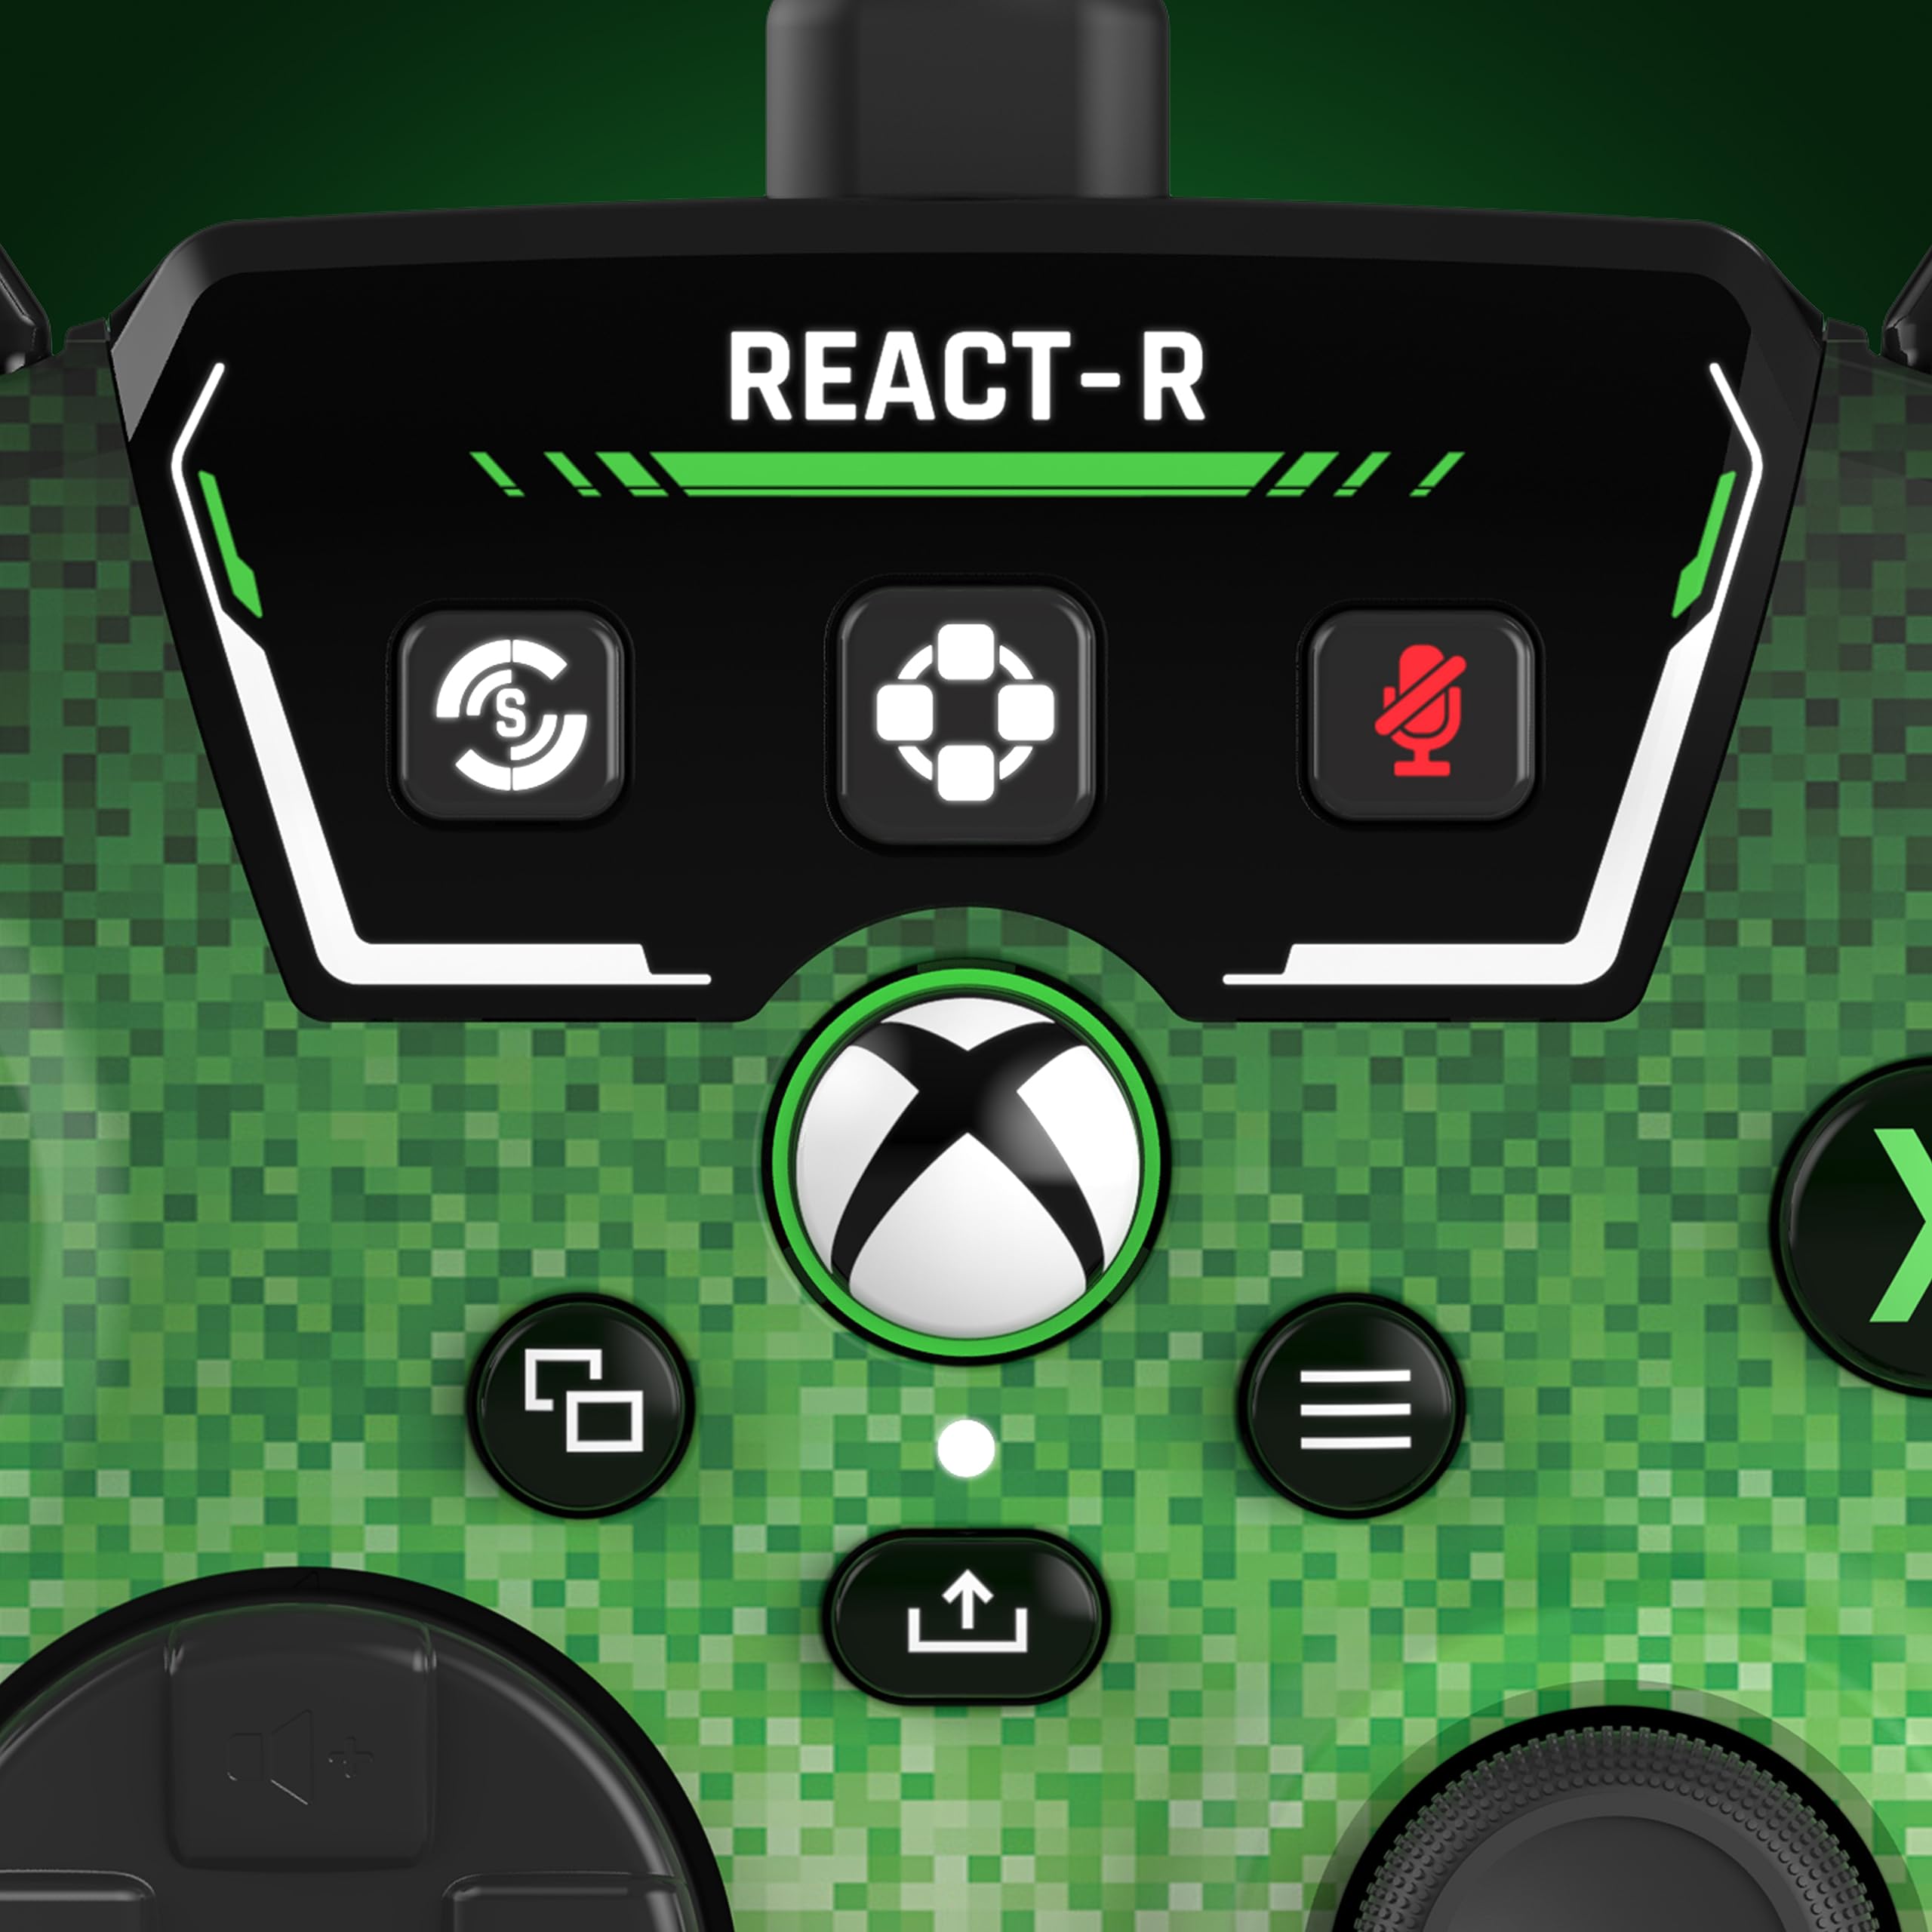 Turtle Beach REACT-R Wired Game Controller – Officially Licensed for Xbox Series X & S, Xbox One, and Windows 10|11 PC’s – Pixel